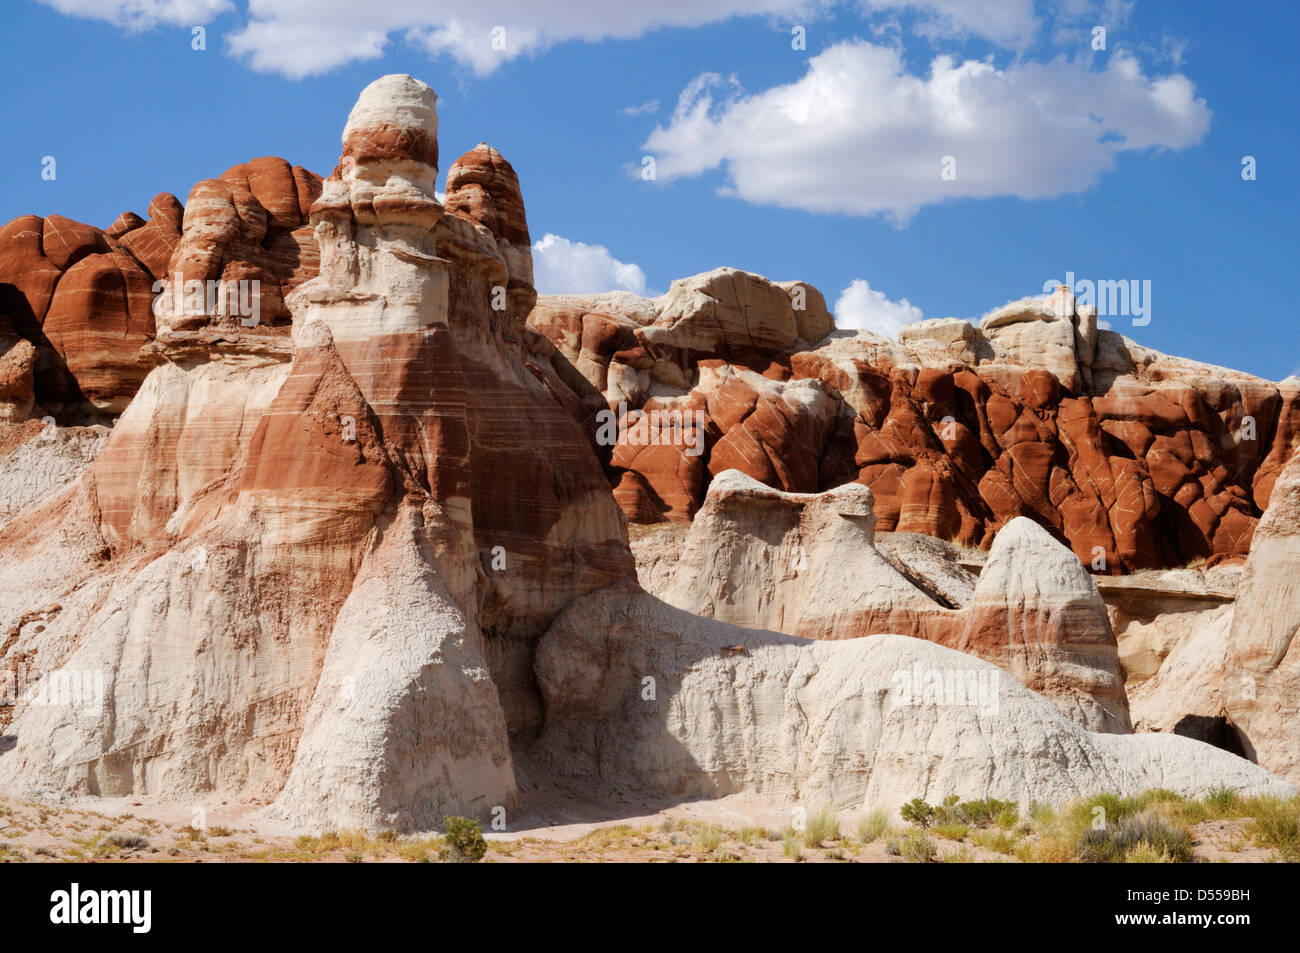 the breathtaking scenery of „Blue Canyon“ with it’s odd-shaped, colourful hoodoos, rock spires and sandstone formations, Arizona, USA Stock Photo